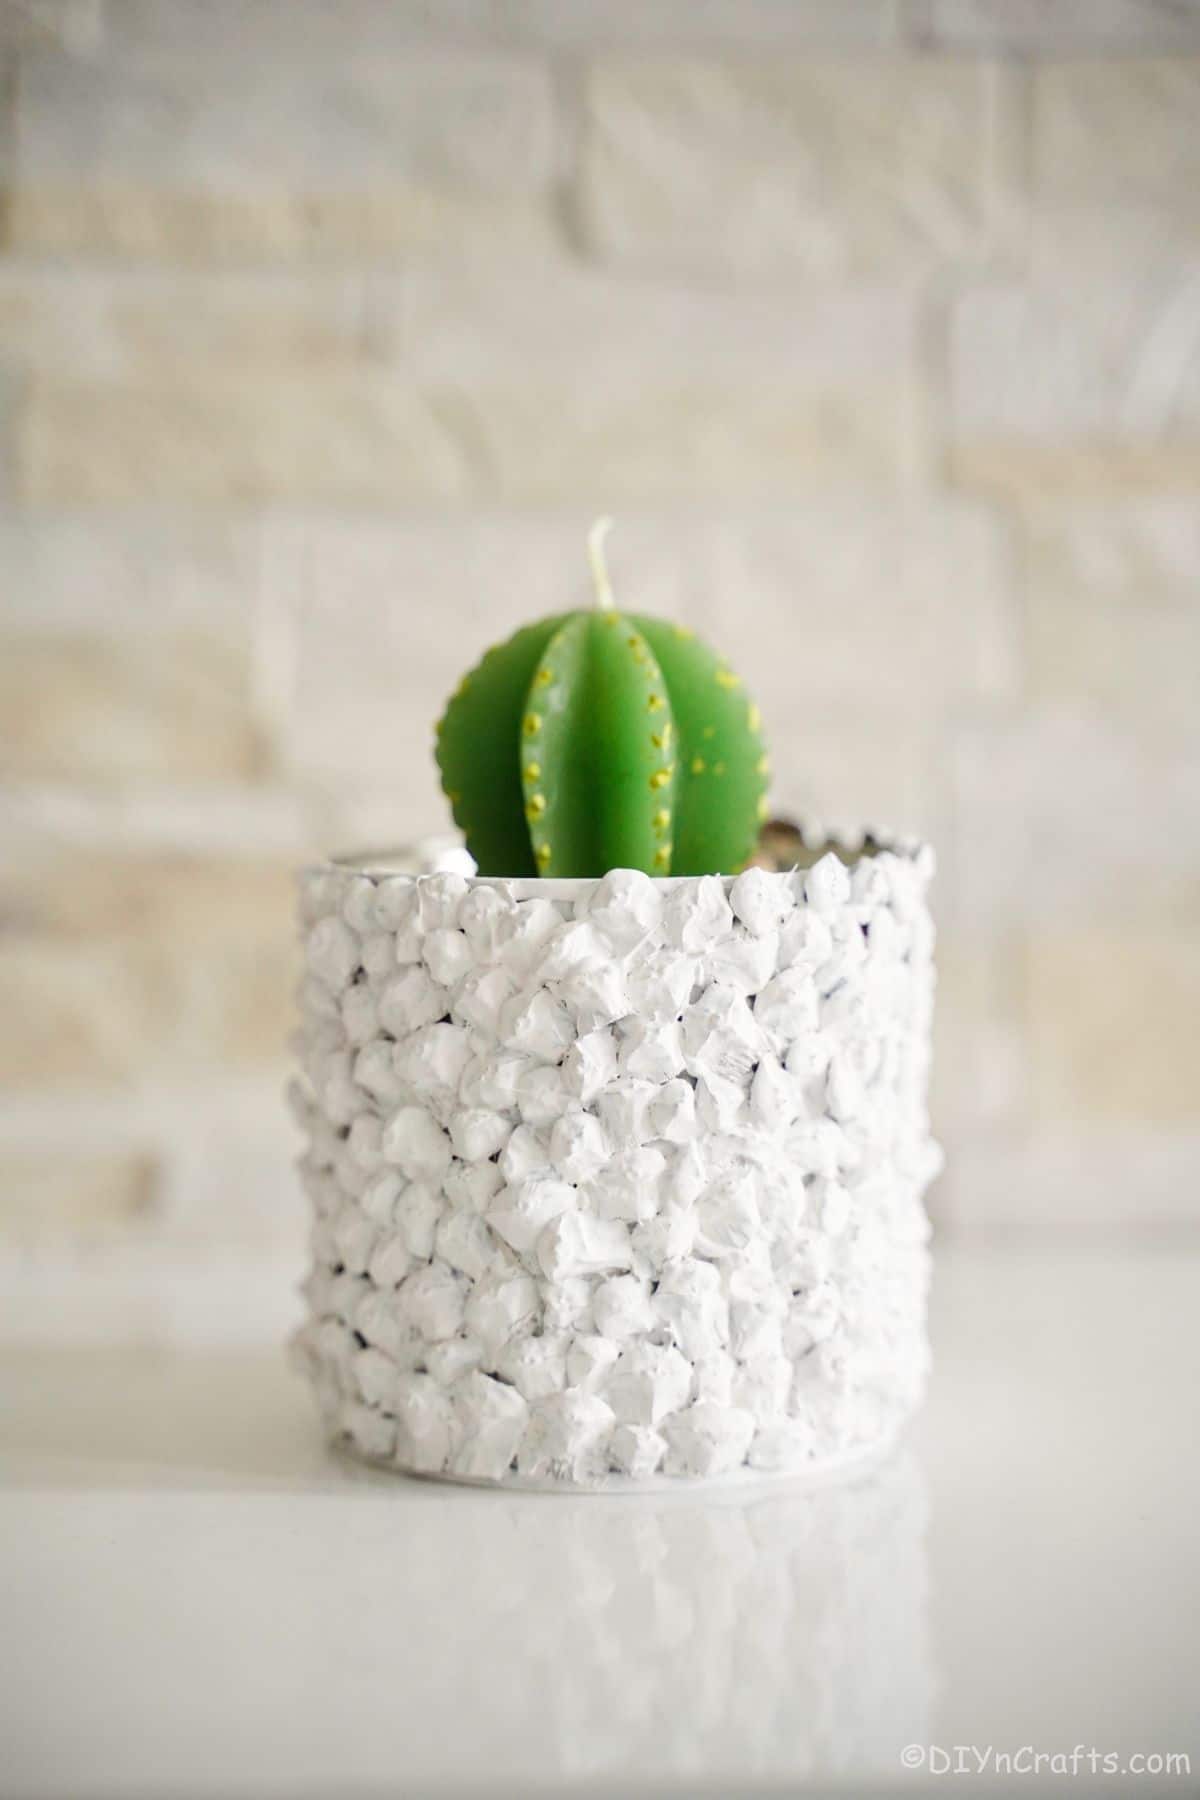 brick wall behind white tin can planter holding green cactus candle